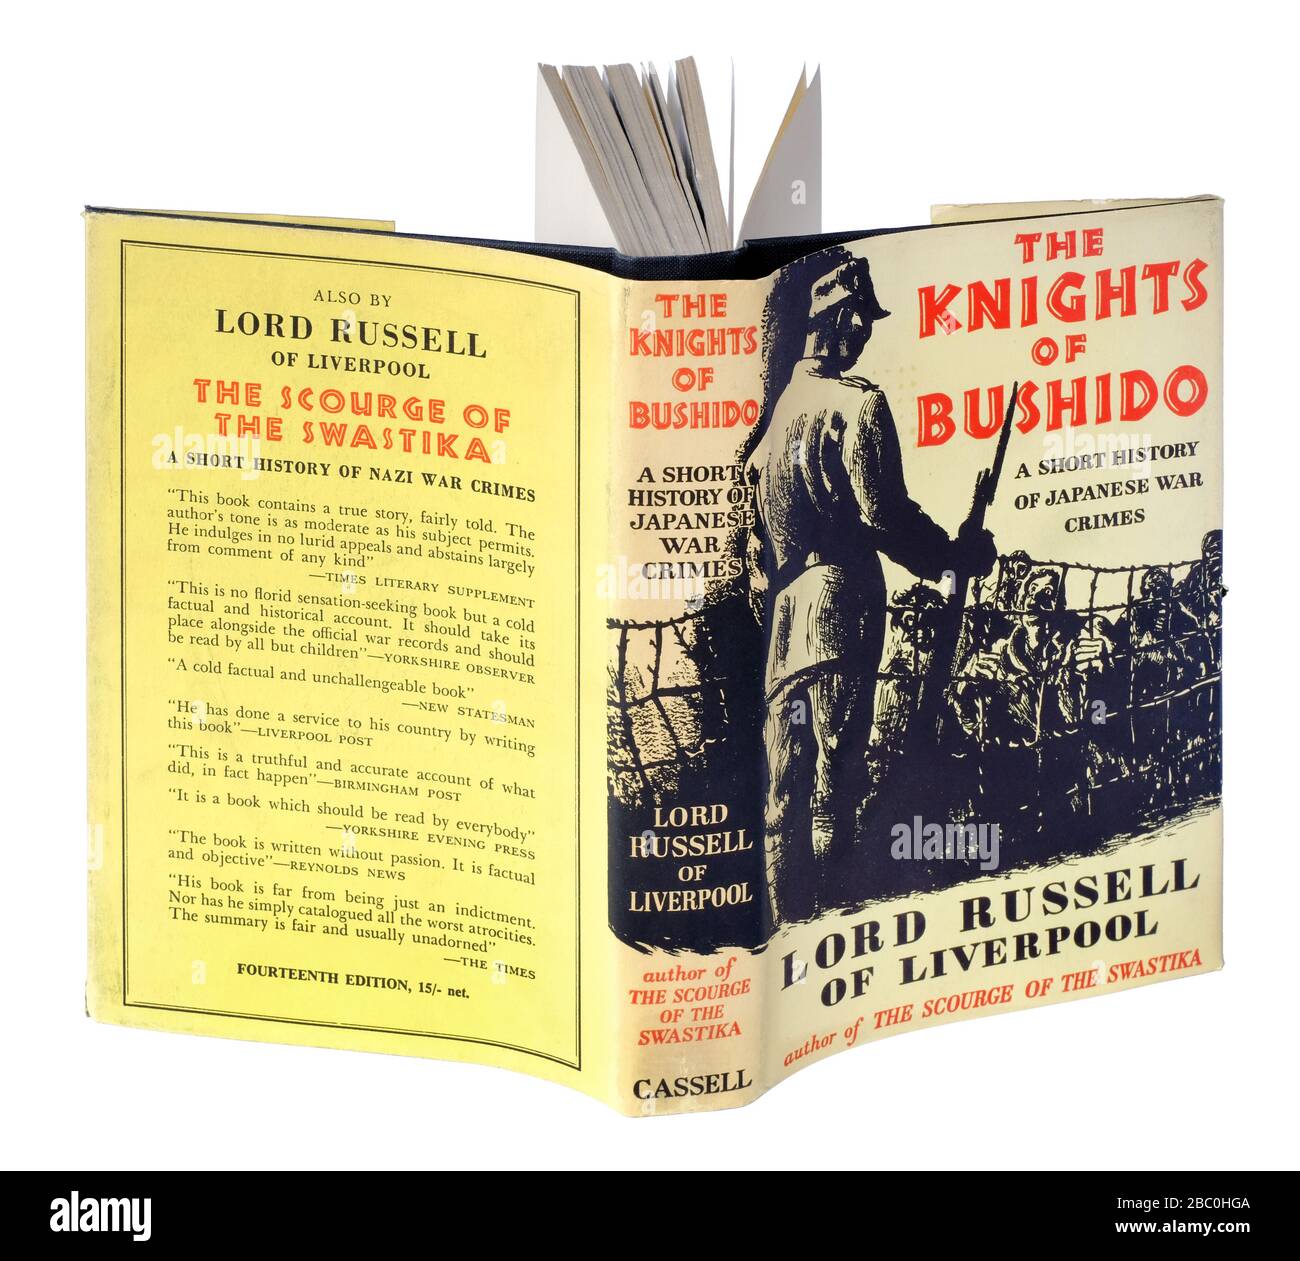 "The Knights of Bushido, a Short History of Japanese War Crimes" di Lord Russell di Liverpool (1958) Foto Stock